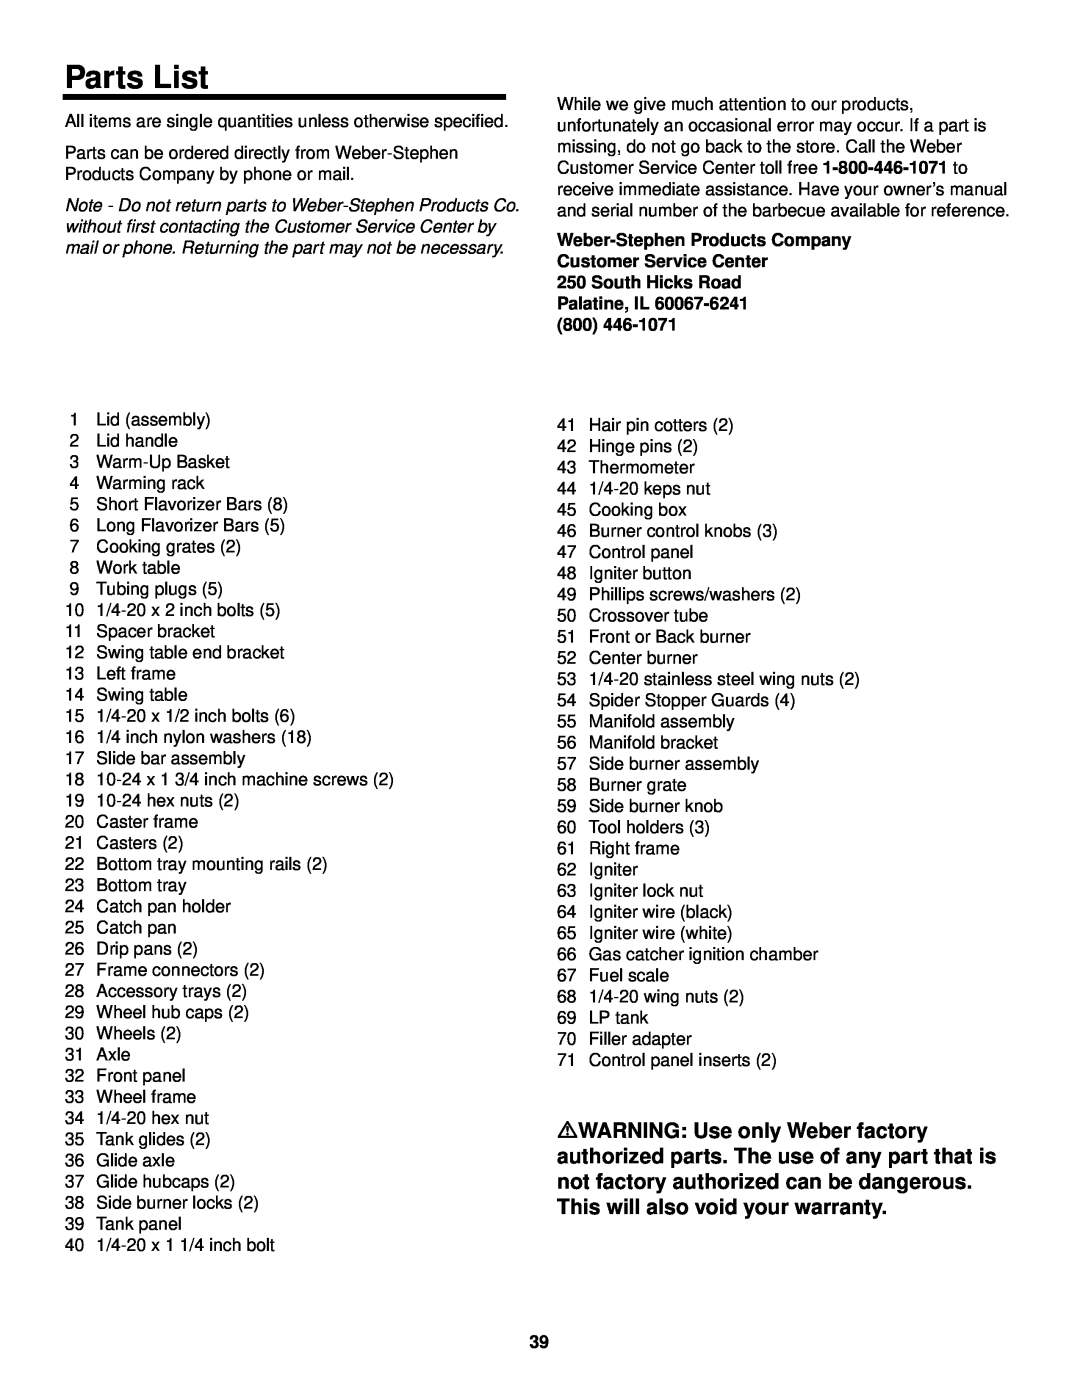 Weber 3000 LX owner manual Parts List, South Hicks Road Palatine, IL 